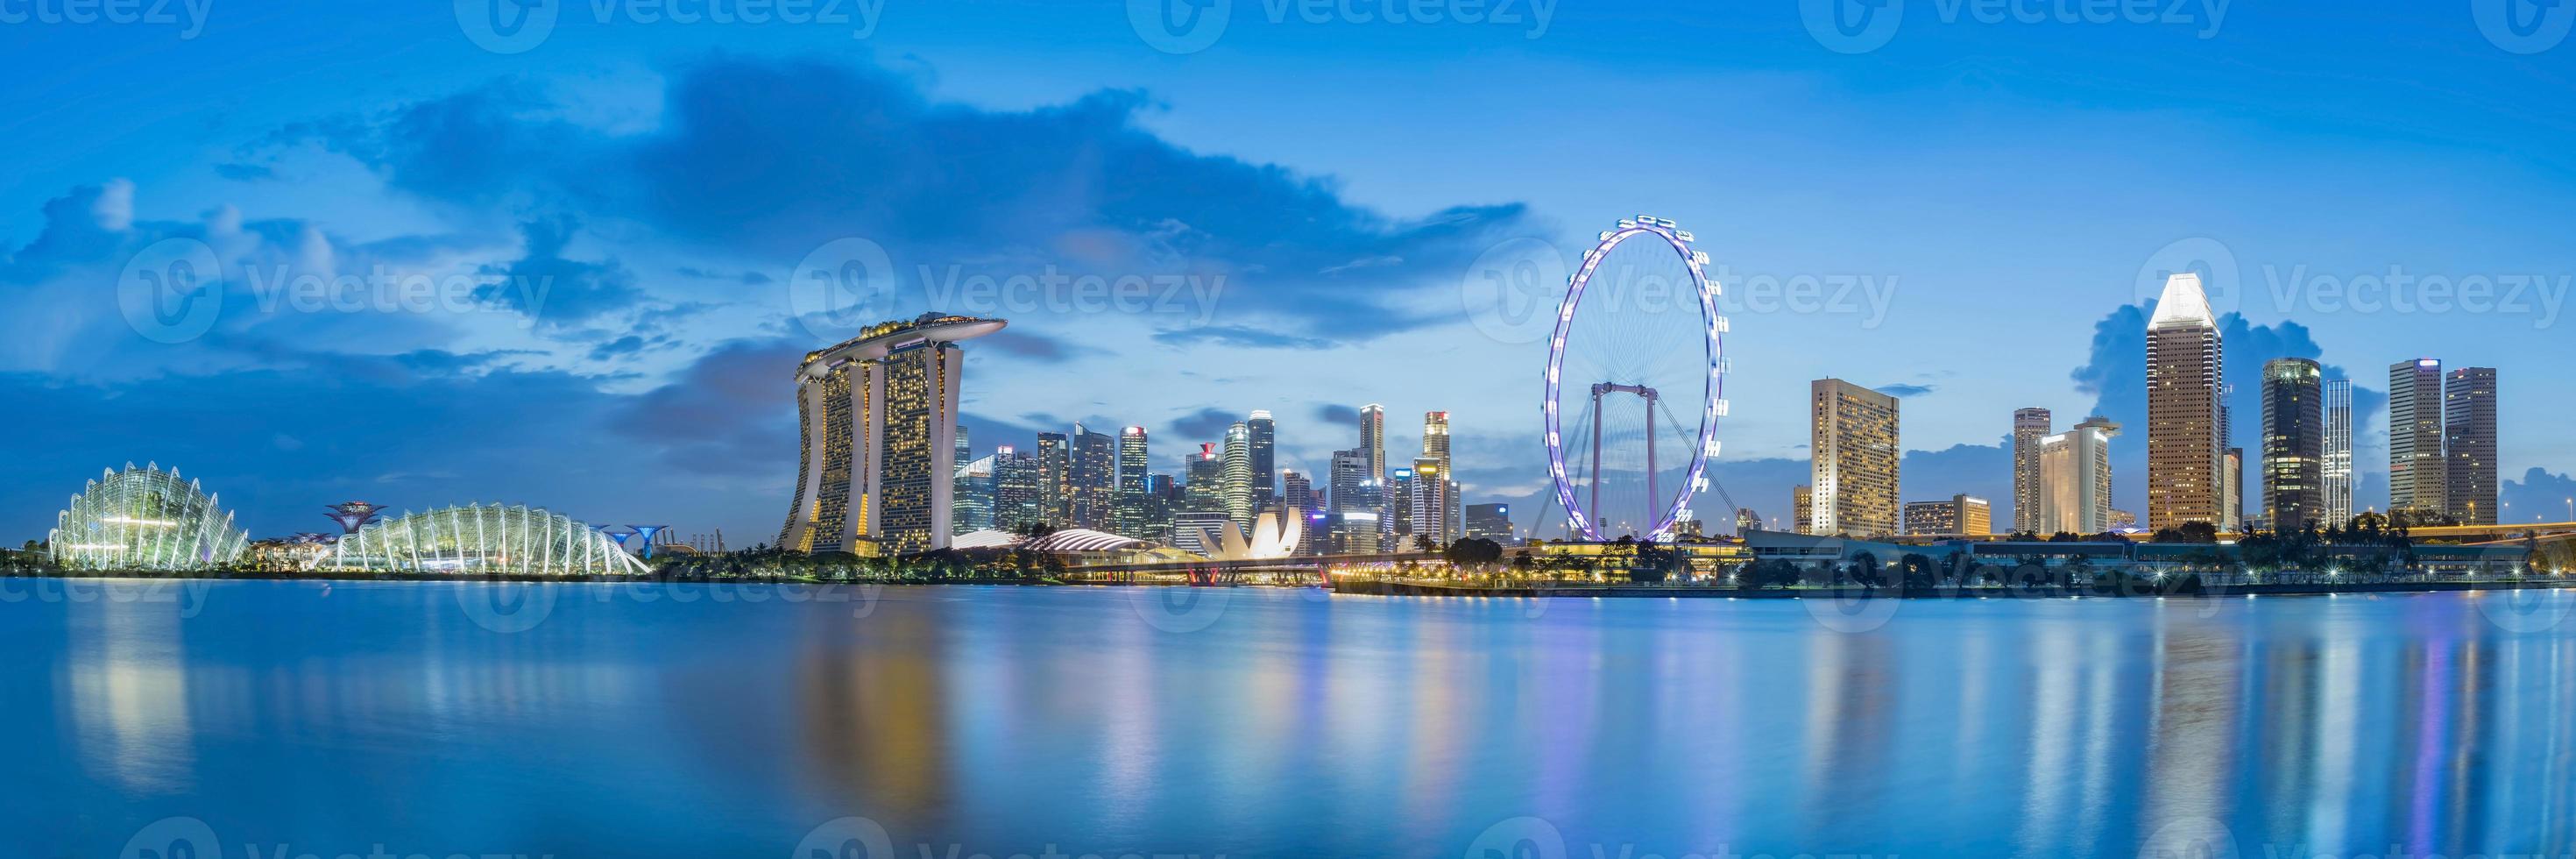 Singapore financial district skyline a marina bay in tempo crepuscolare. foto